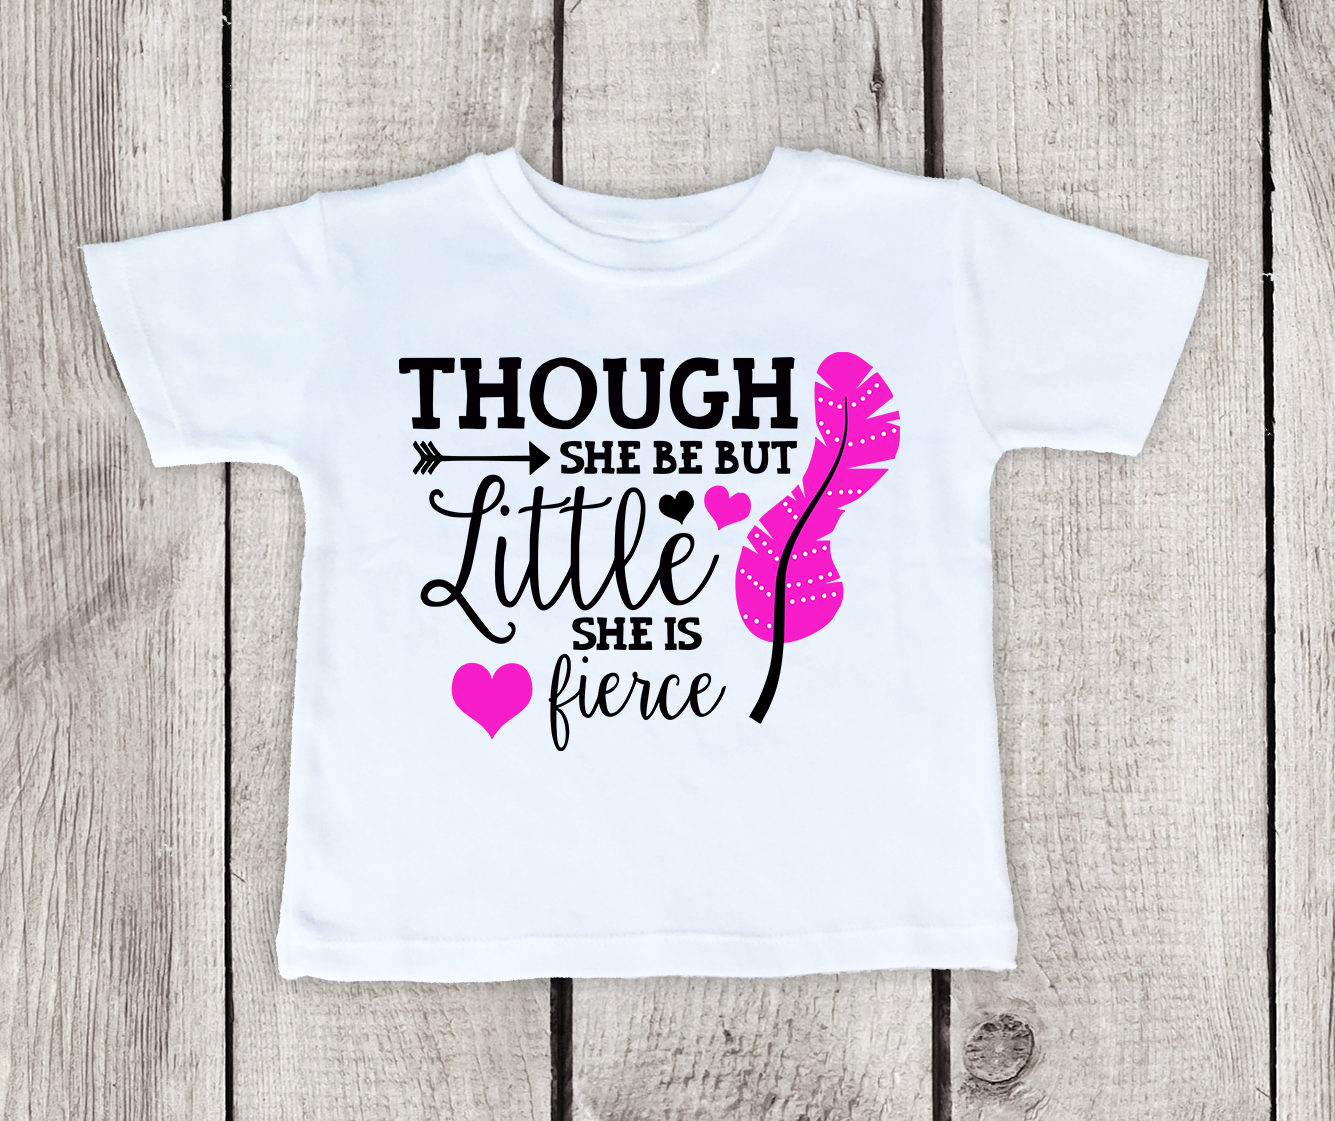 girls shirts with quotes